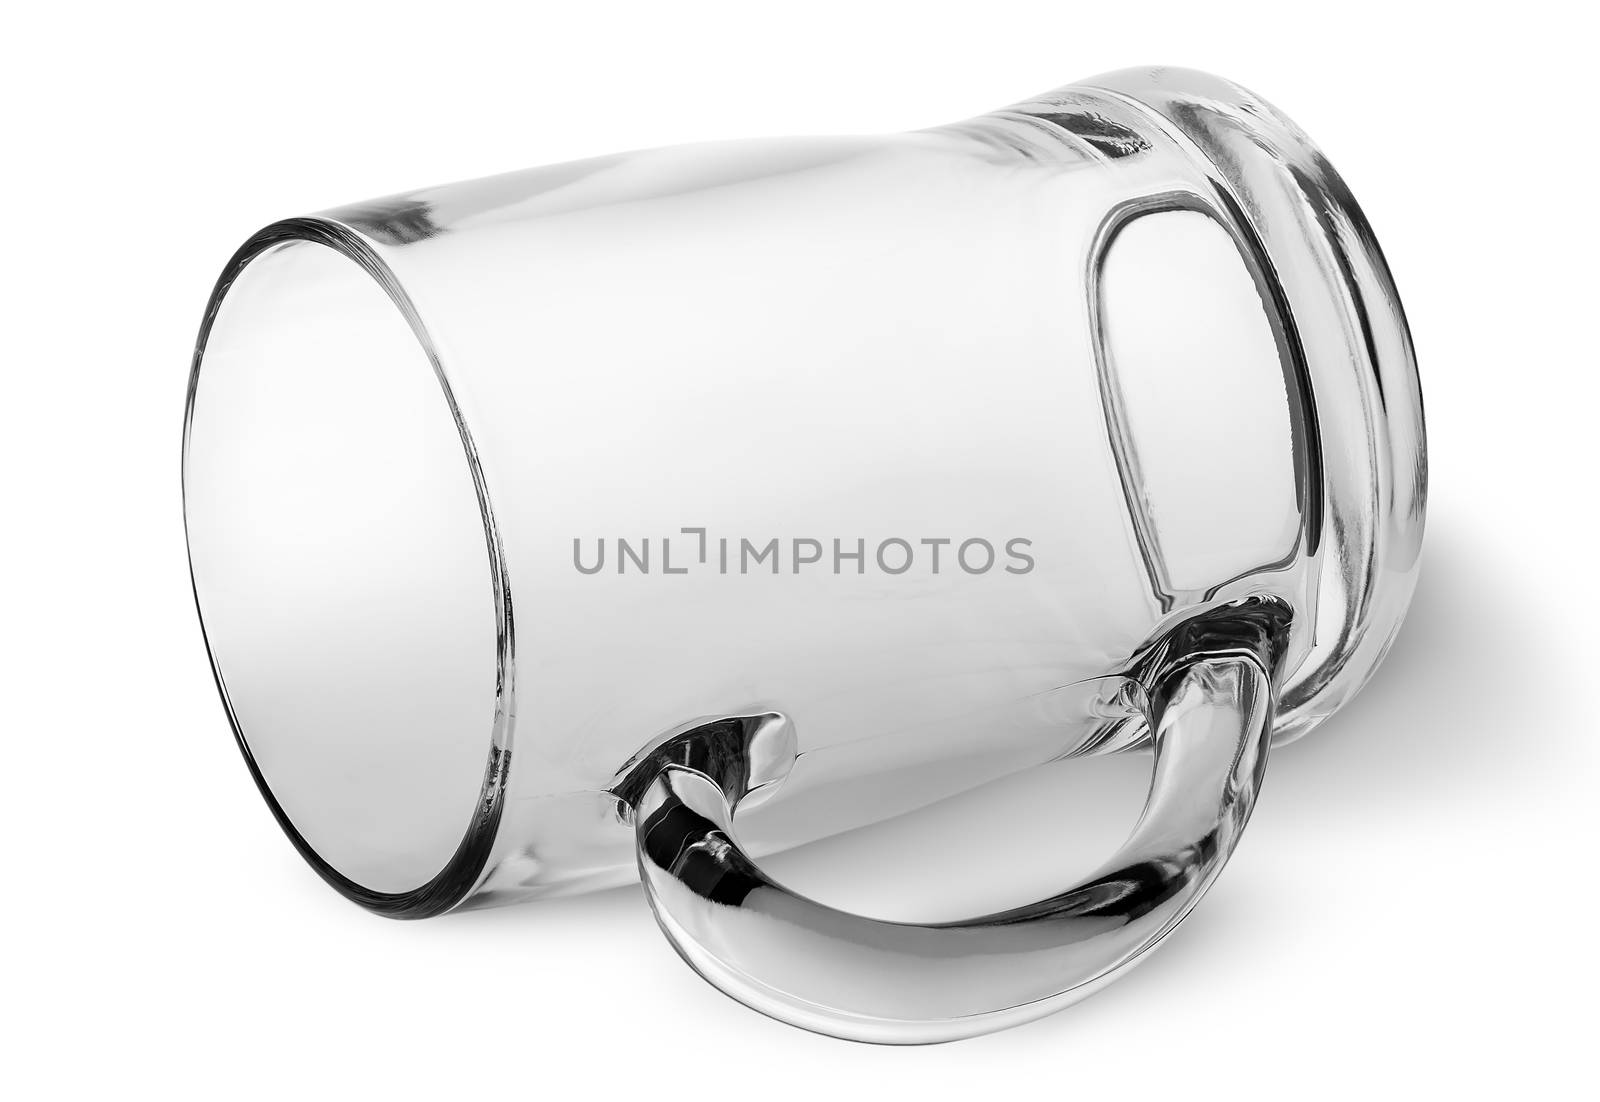 Glass beer mug on the side isolated on white background